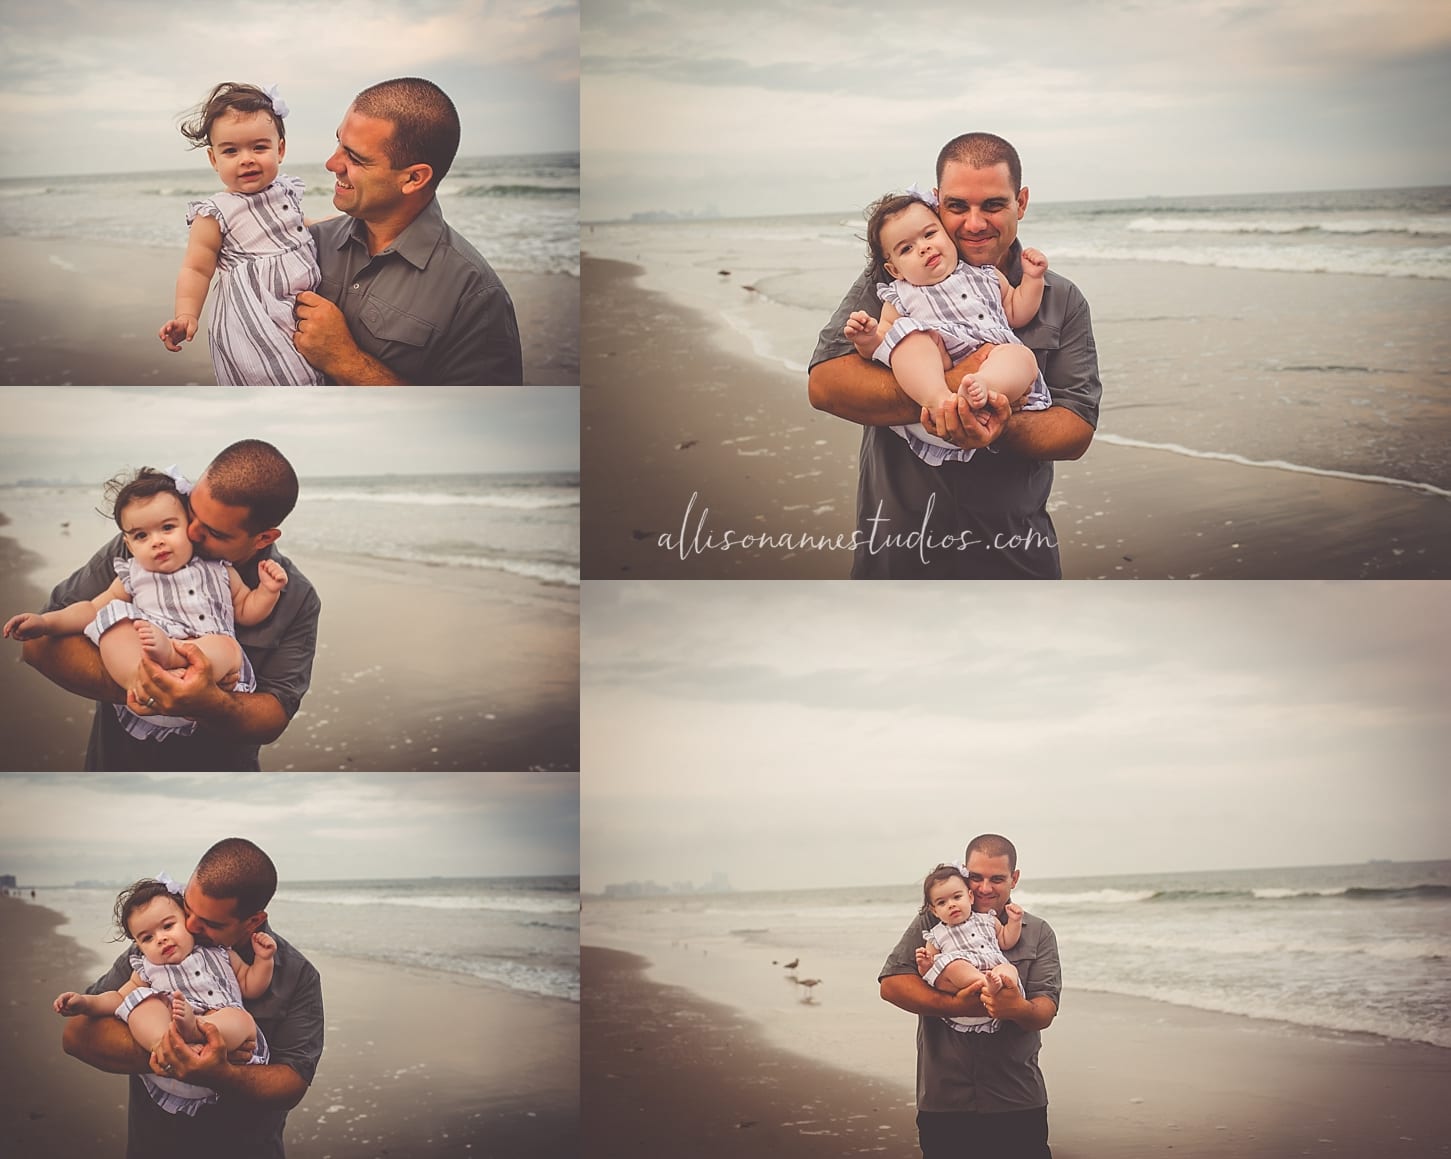 Amelia, no cake for me, 37 weeks pregnant, love, Hammonton, AllisonAnne Studios, Allison Gallagher, sandy beaches, jersey shore, clouds and fog are a good thing